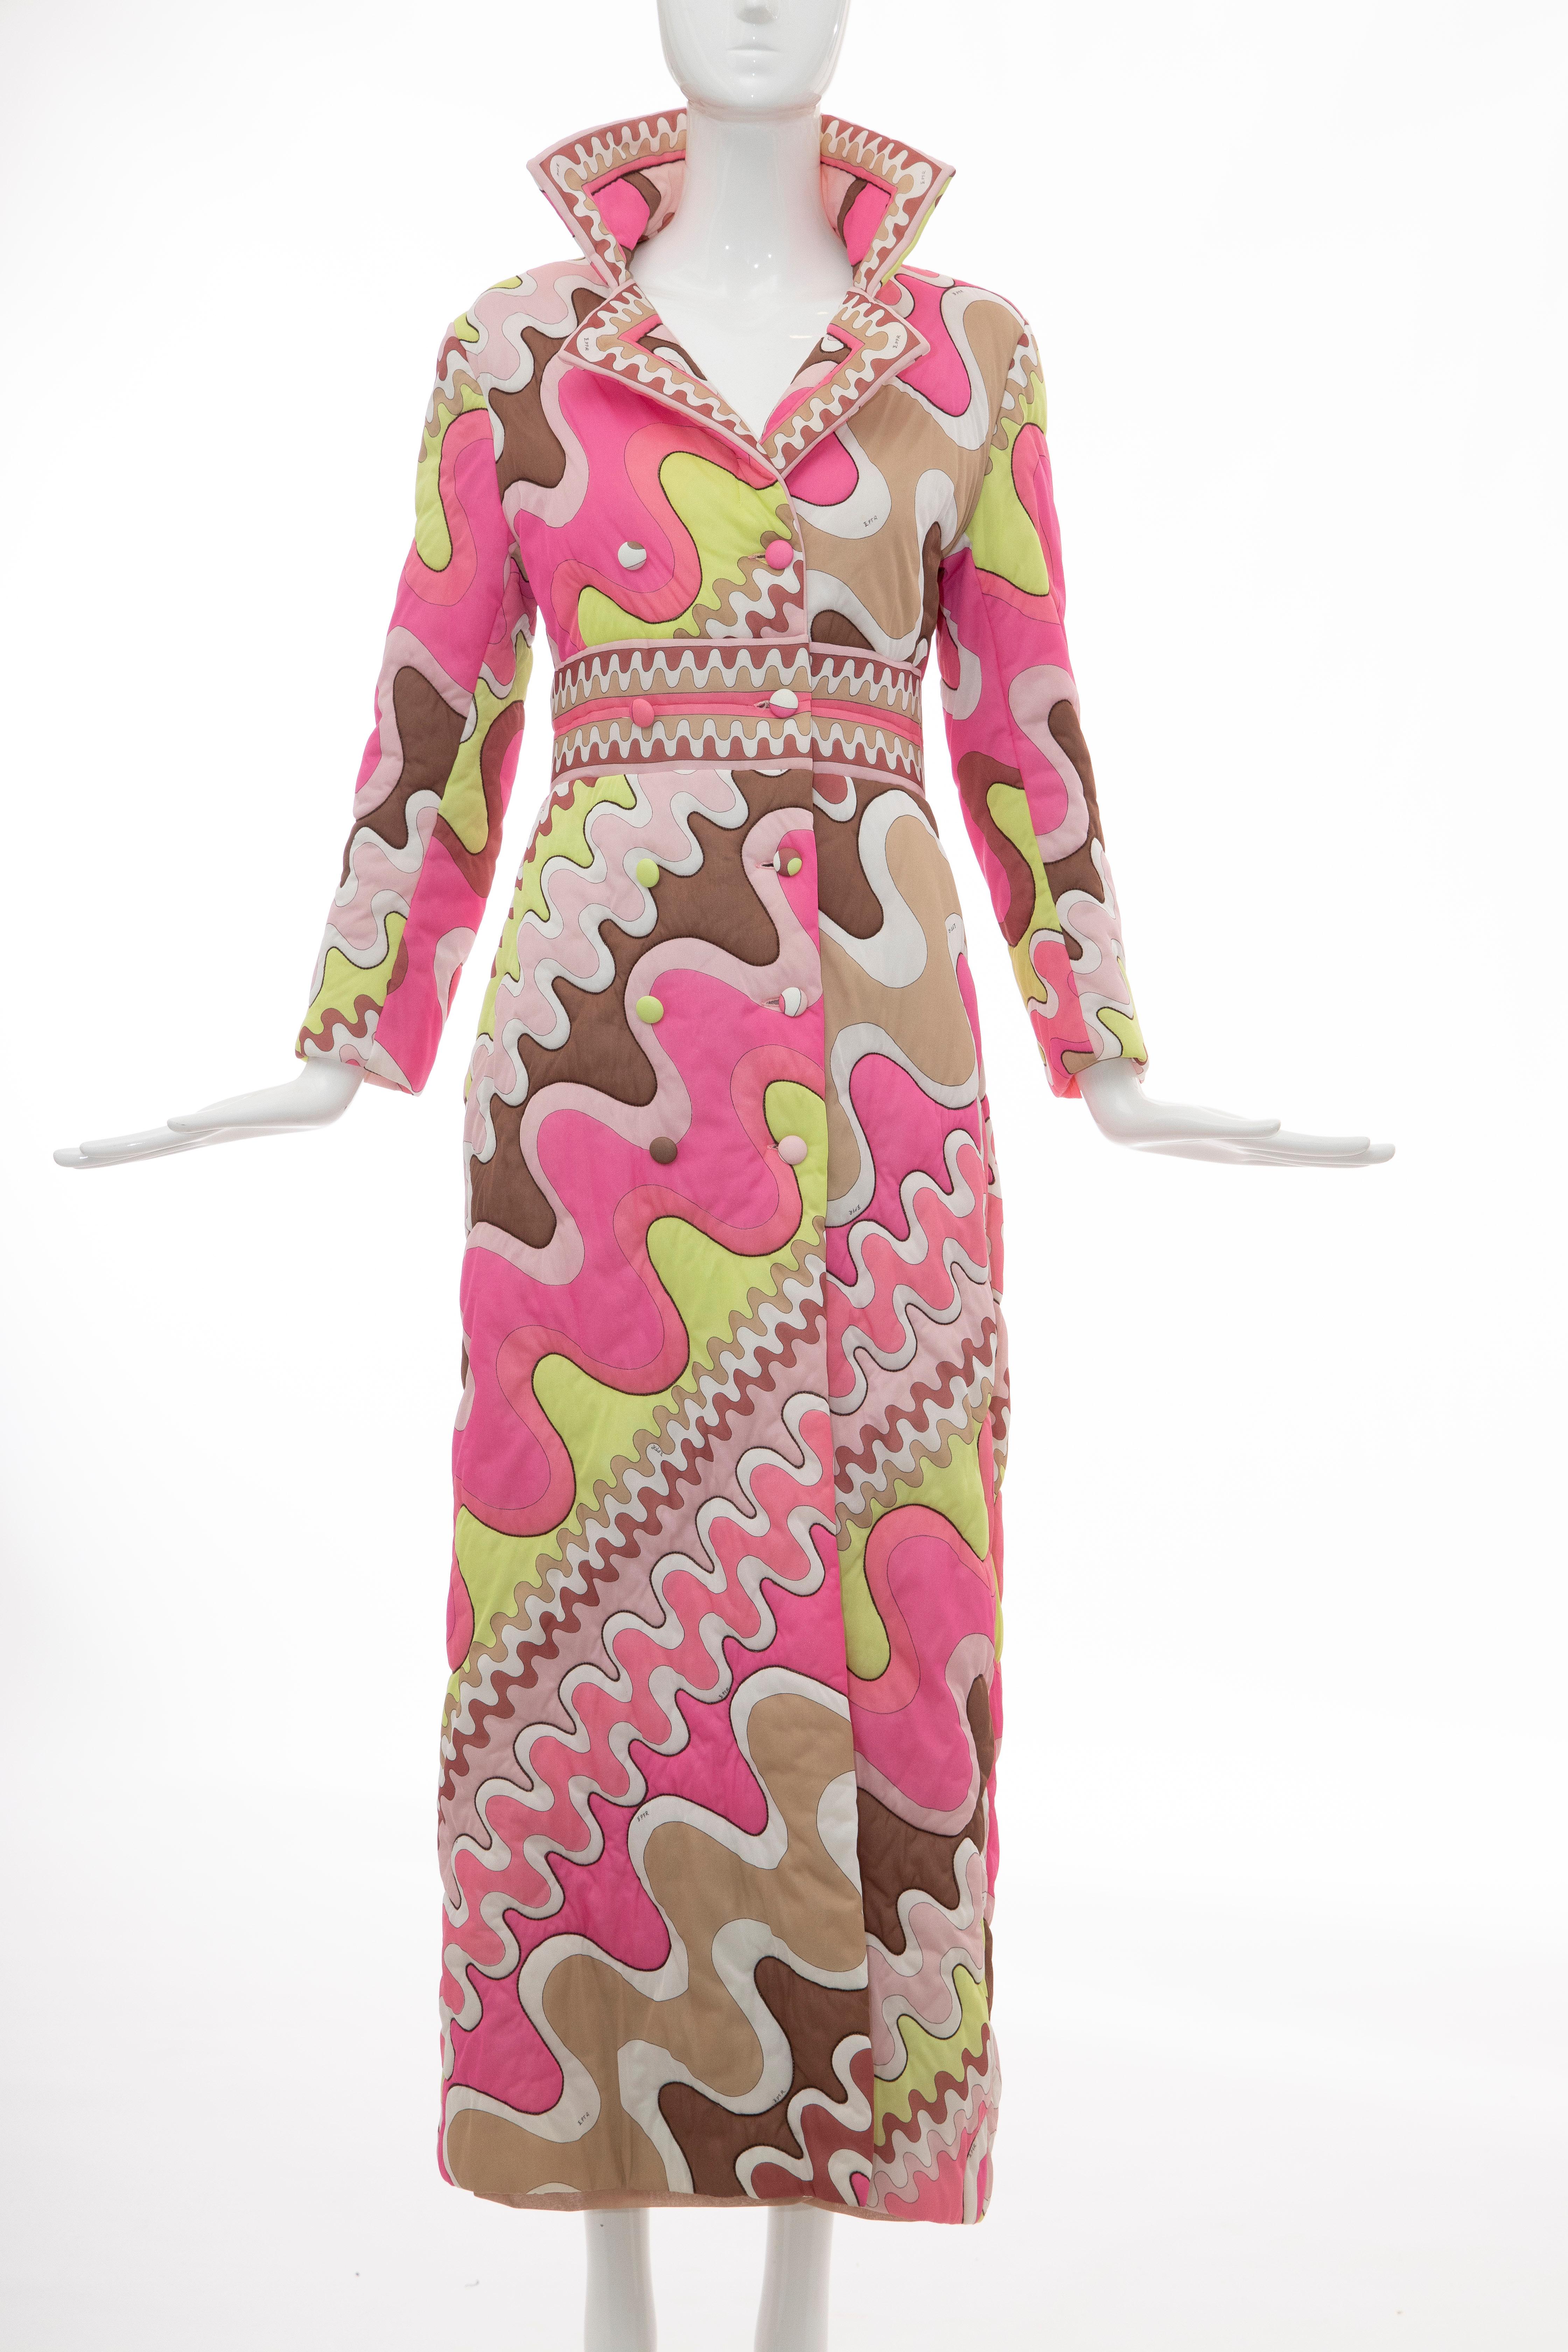 Emilio Pucci Formfit Rogers, Circa: 1970's long double-breasted quilted polyester coat with abstract print throughout, notched lapels, dual seam pockets and button closures at front.

Small
Bust: 36, Waist: 31, Shoulder: 16, Length: 53, Sleeve: 28
